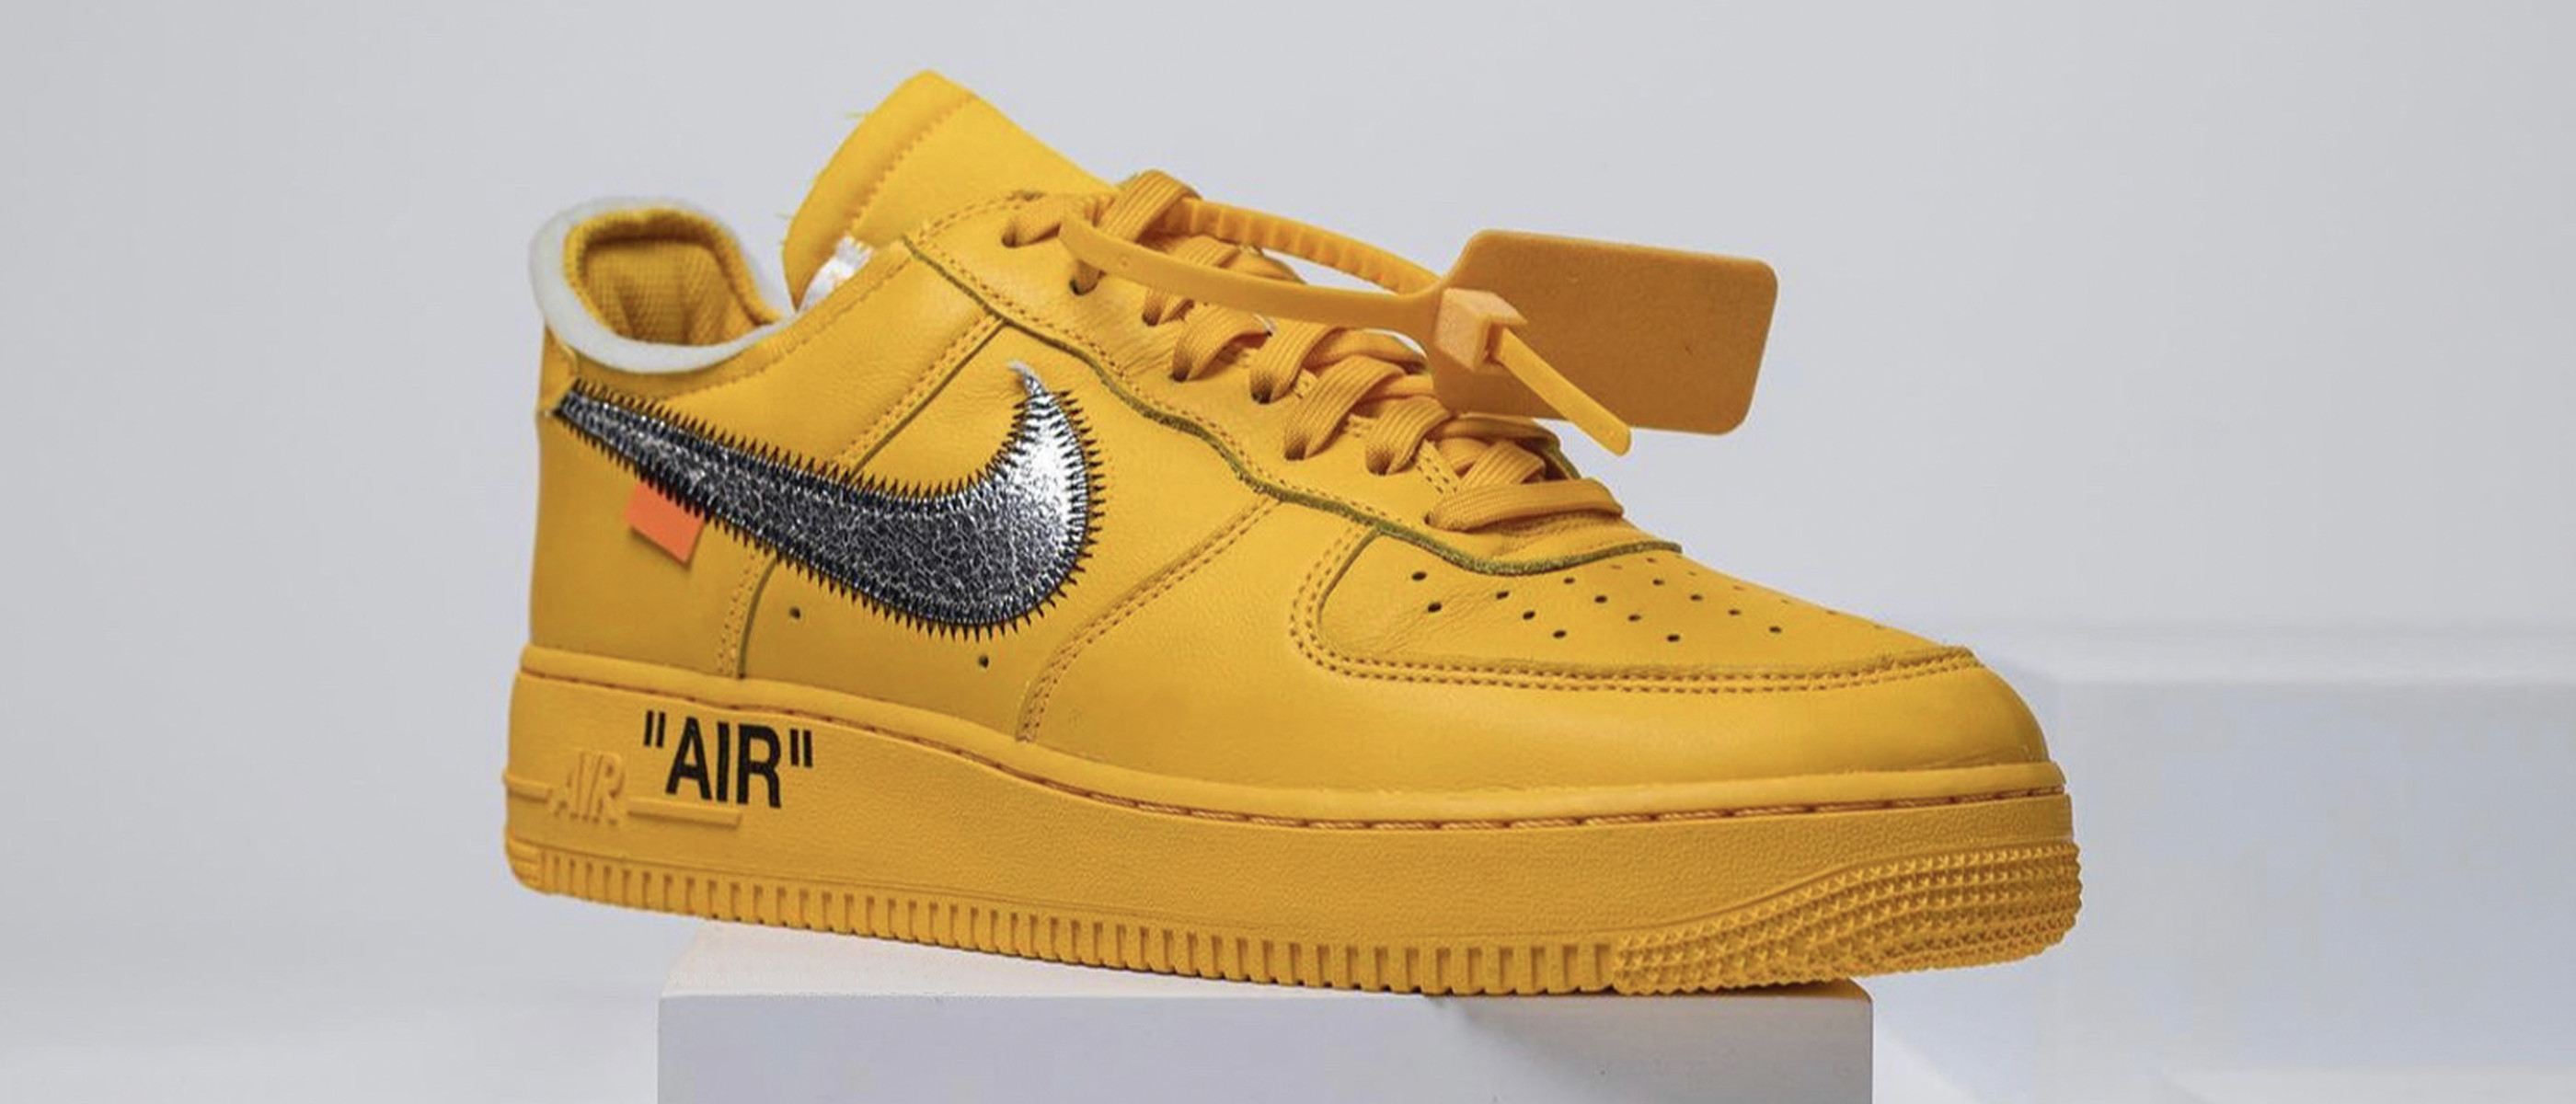 Nike And Off-White's Air Force 1 Will Launch At ComplexCon Chicago